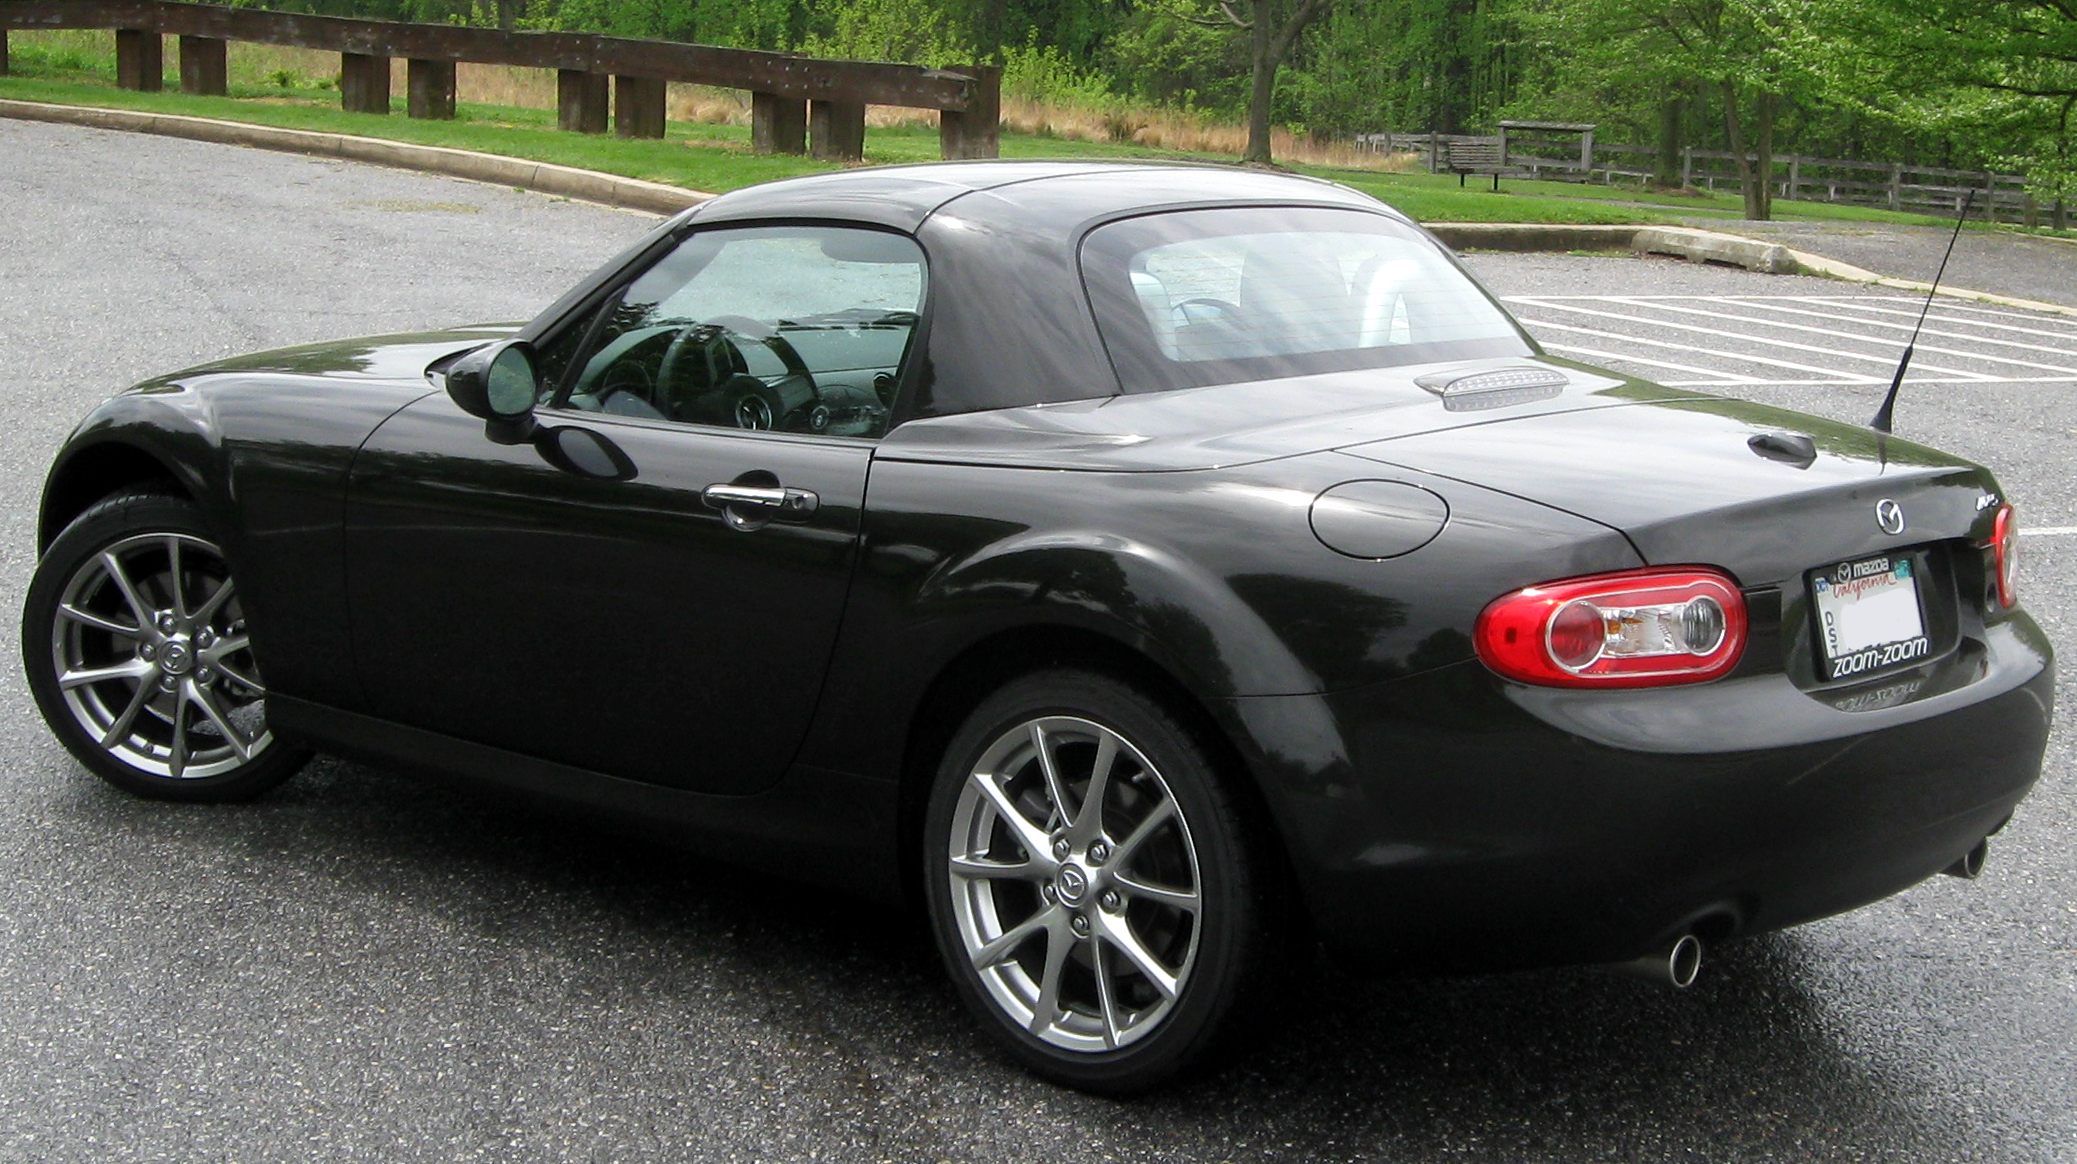 Mazda MX-5 1998: Review, Amazing Pictures and Images ...